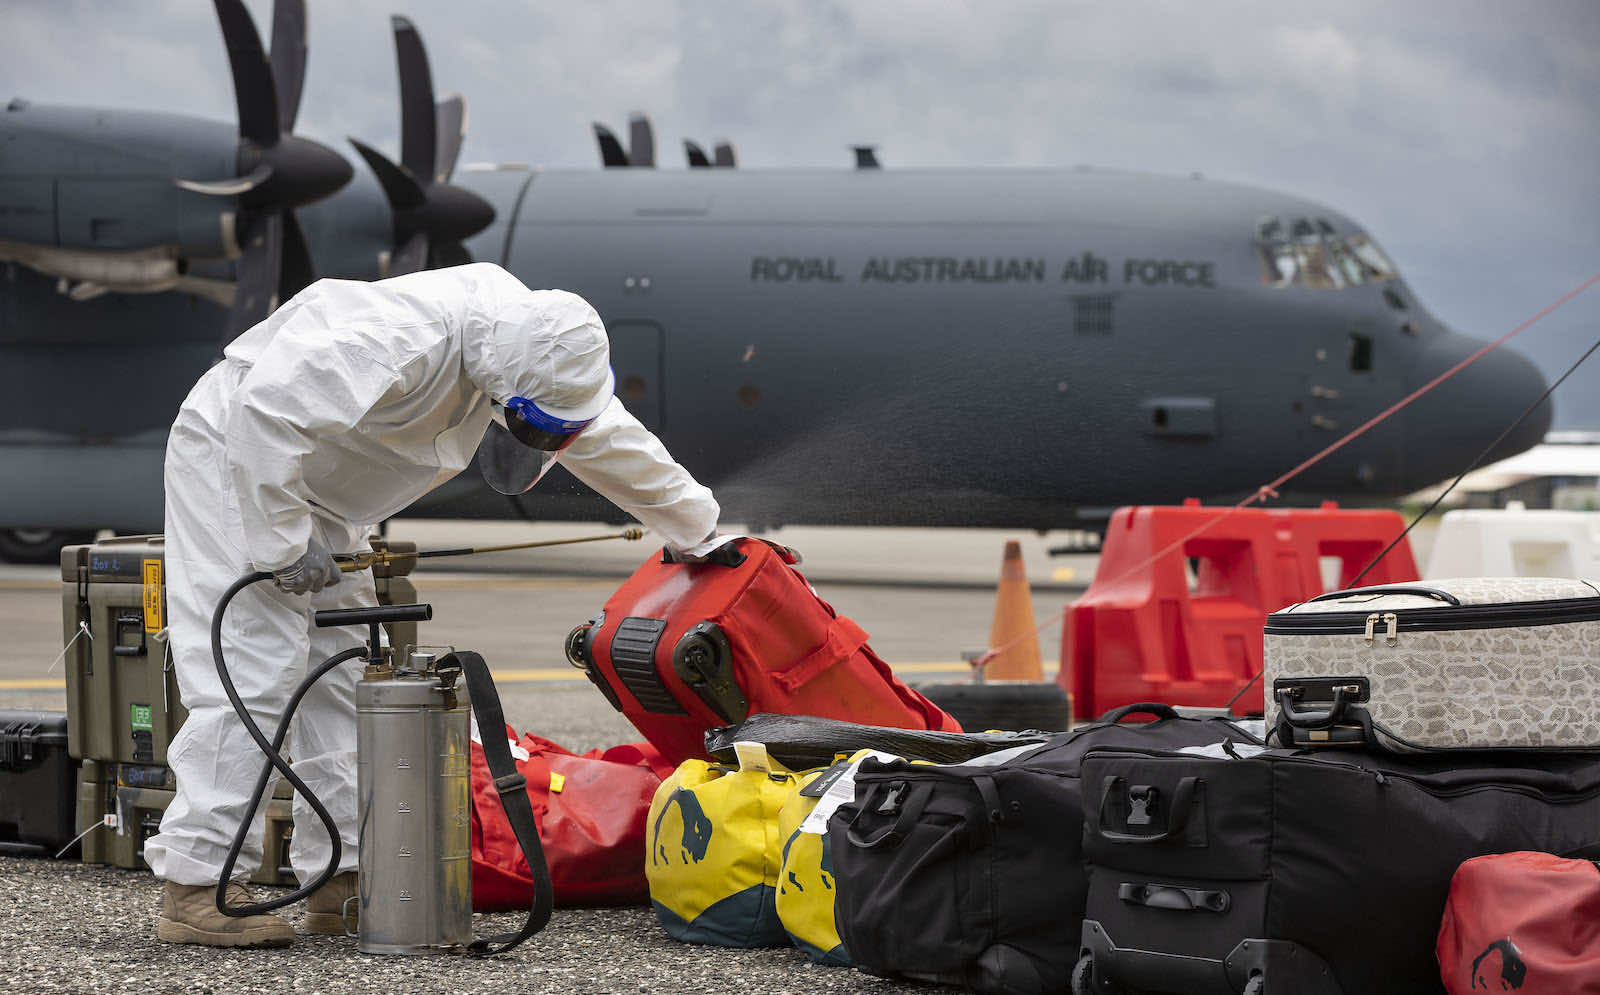 Personal baggage is disinfected at Honiara airport in line with Covid-19 protocols in Solomon Islands following the arrival of an Australian aid flight (Defence Department)